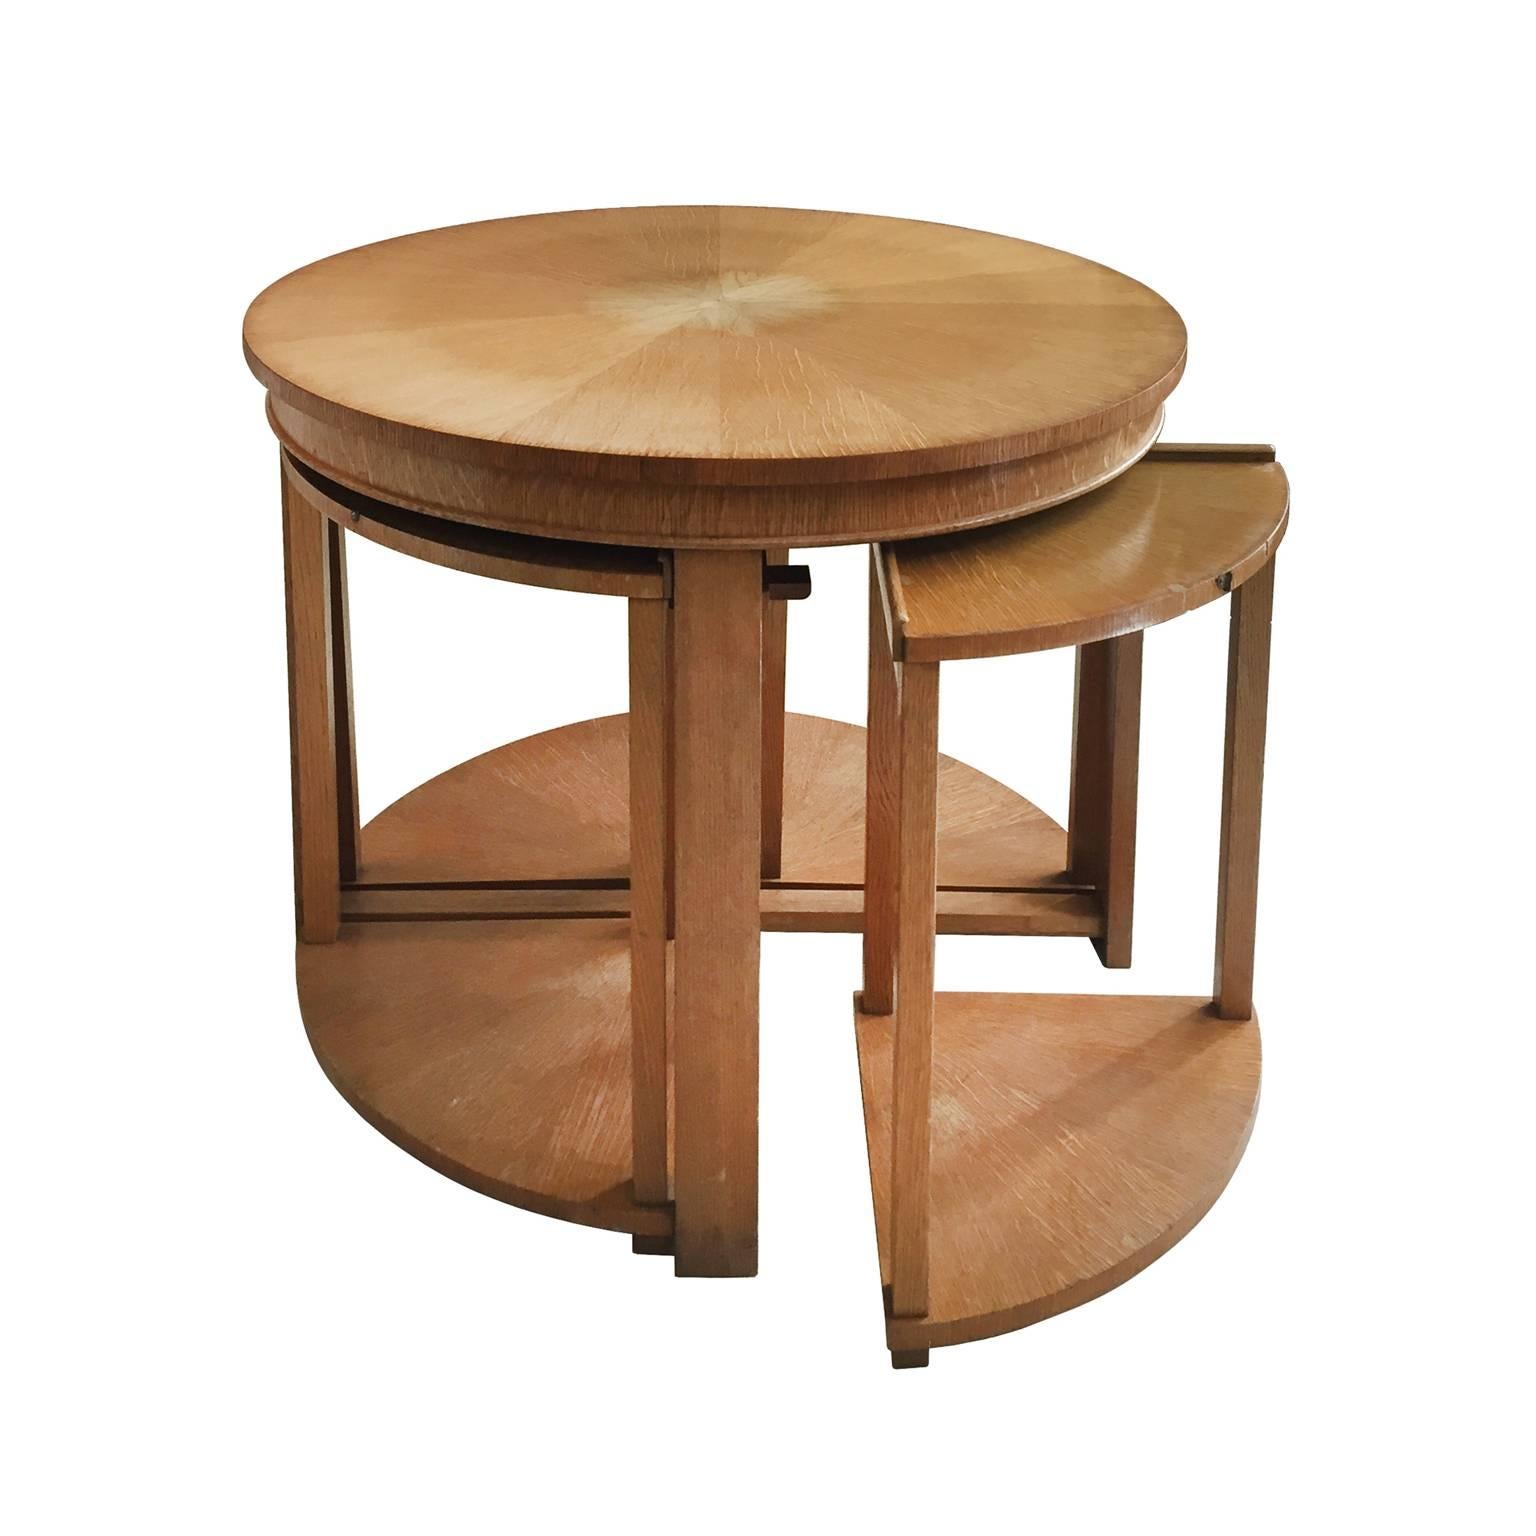 Midcentury Round Sycamore Side Table with Four Nesting Tables by De Coene